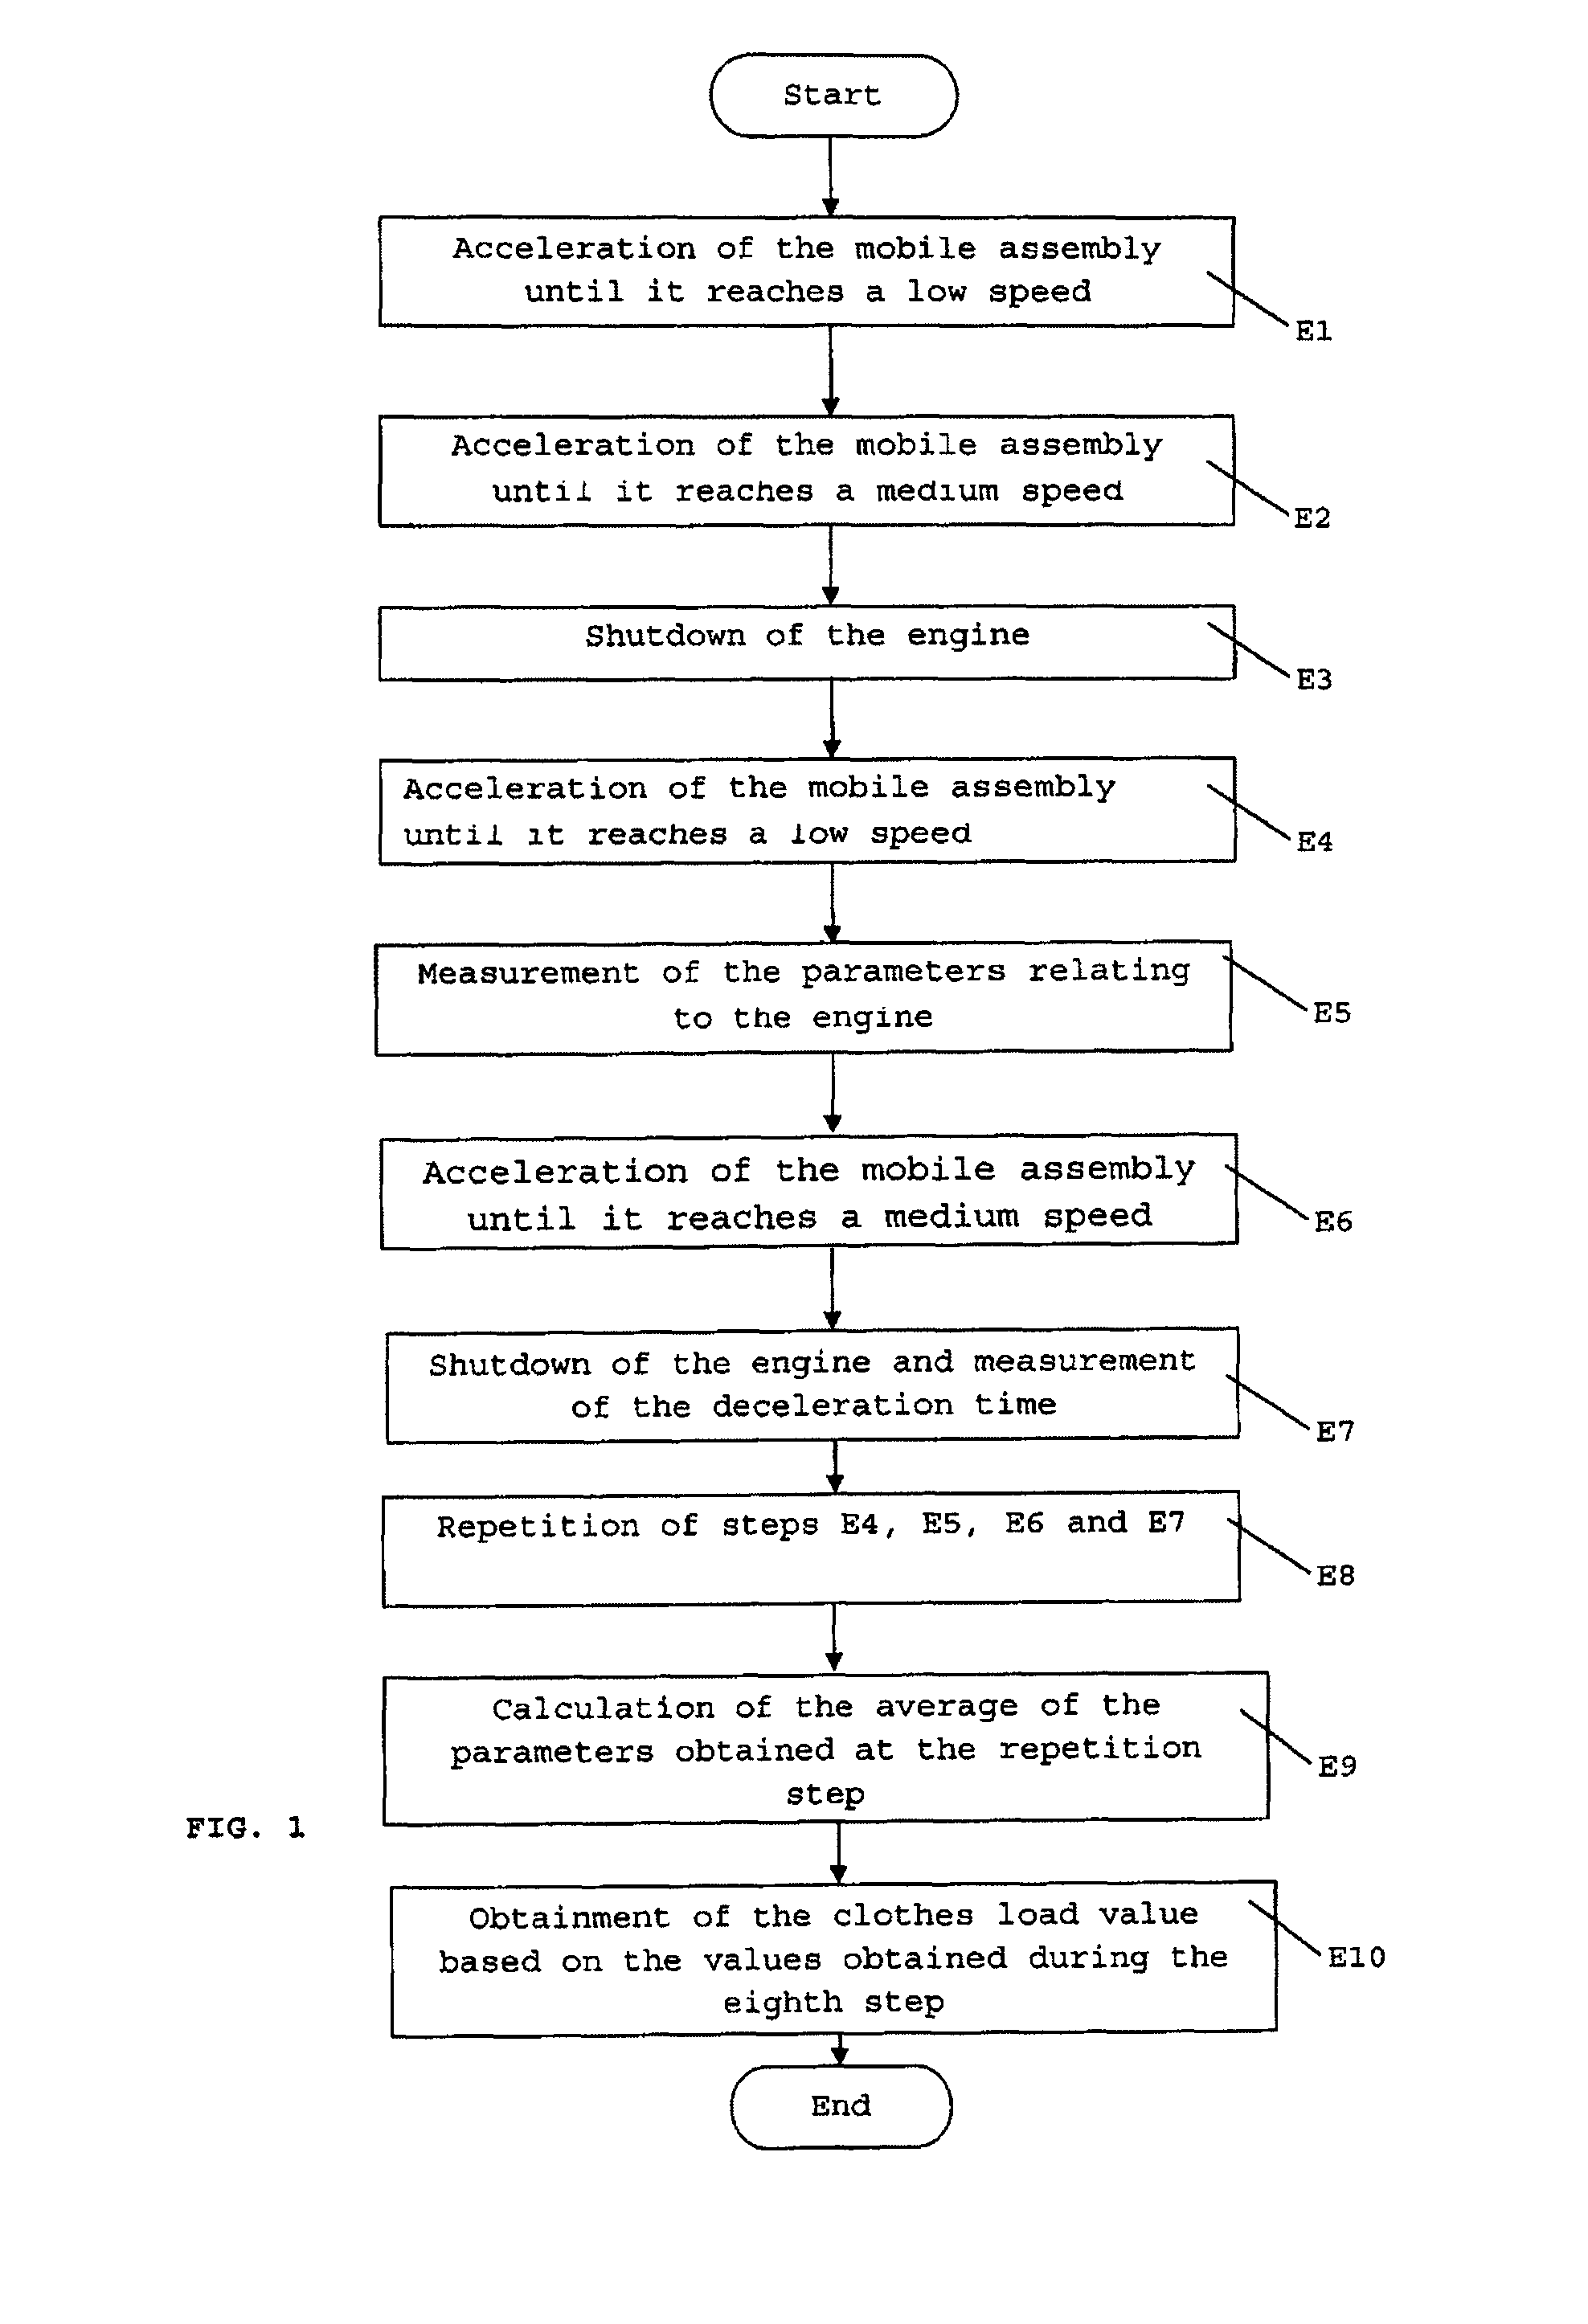 Method for determining loads in clothes washing machines